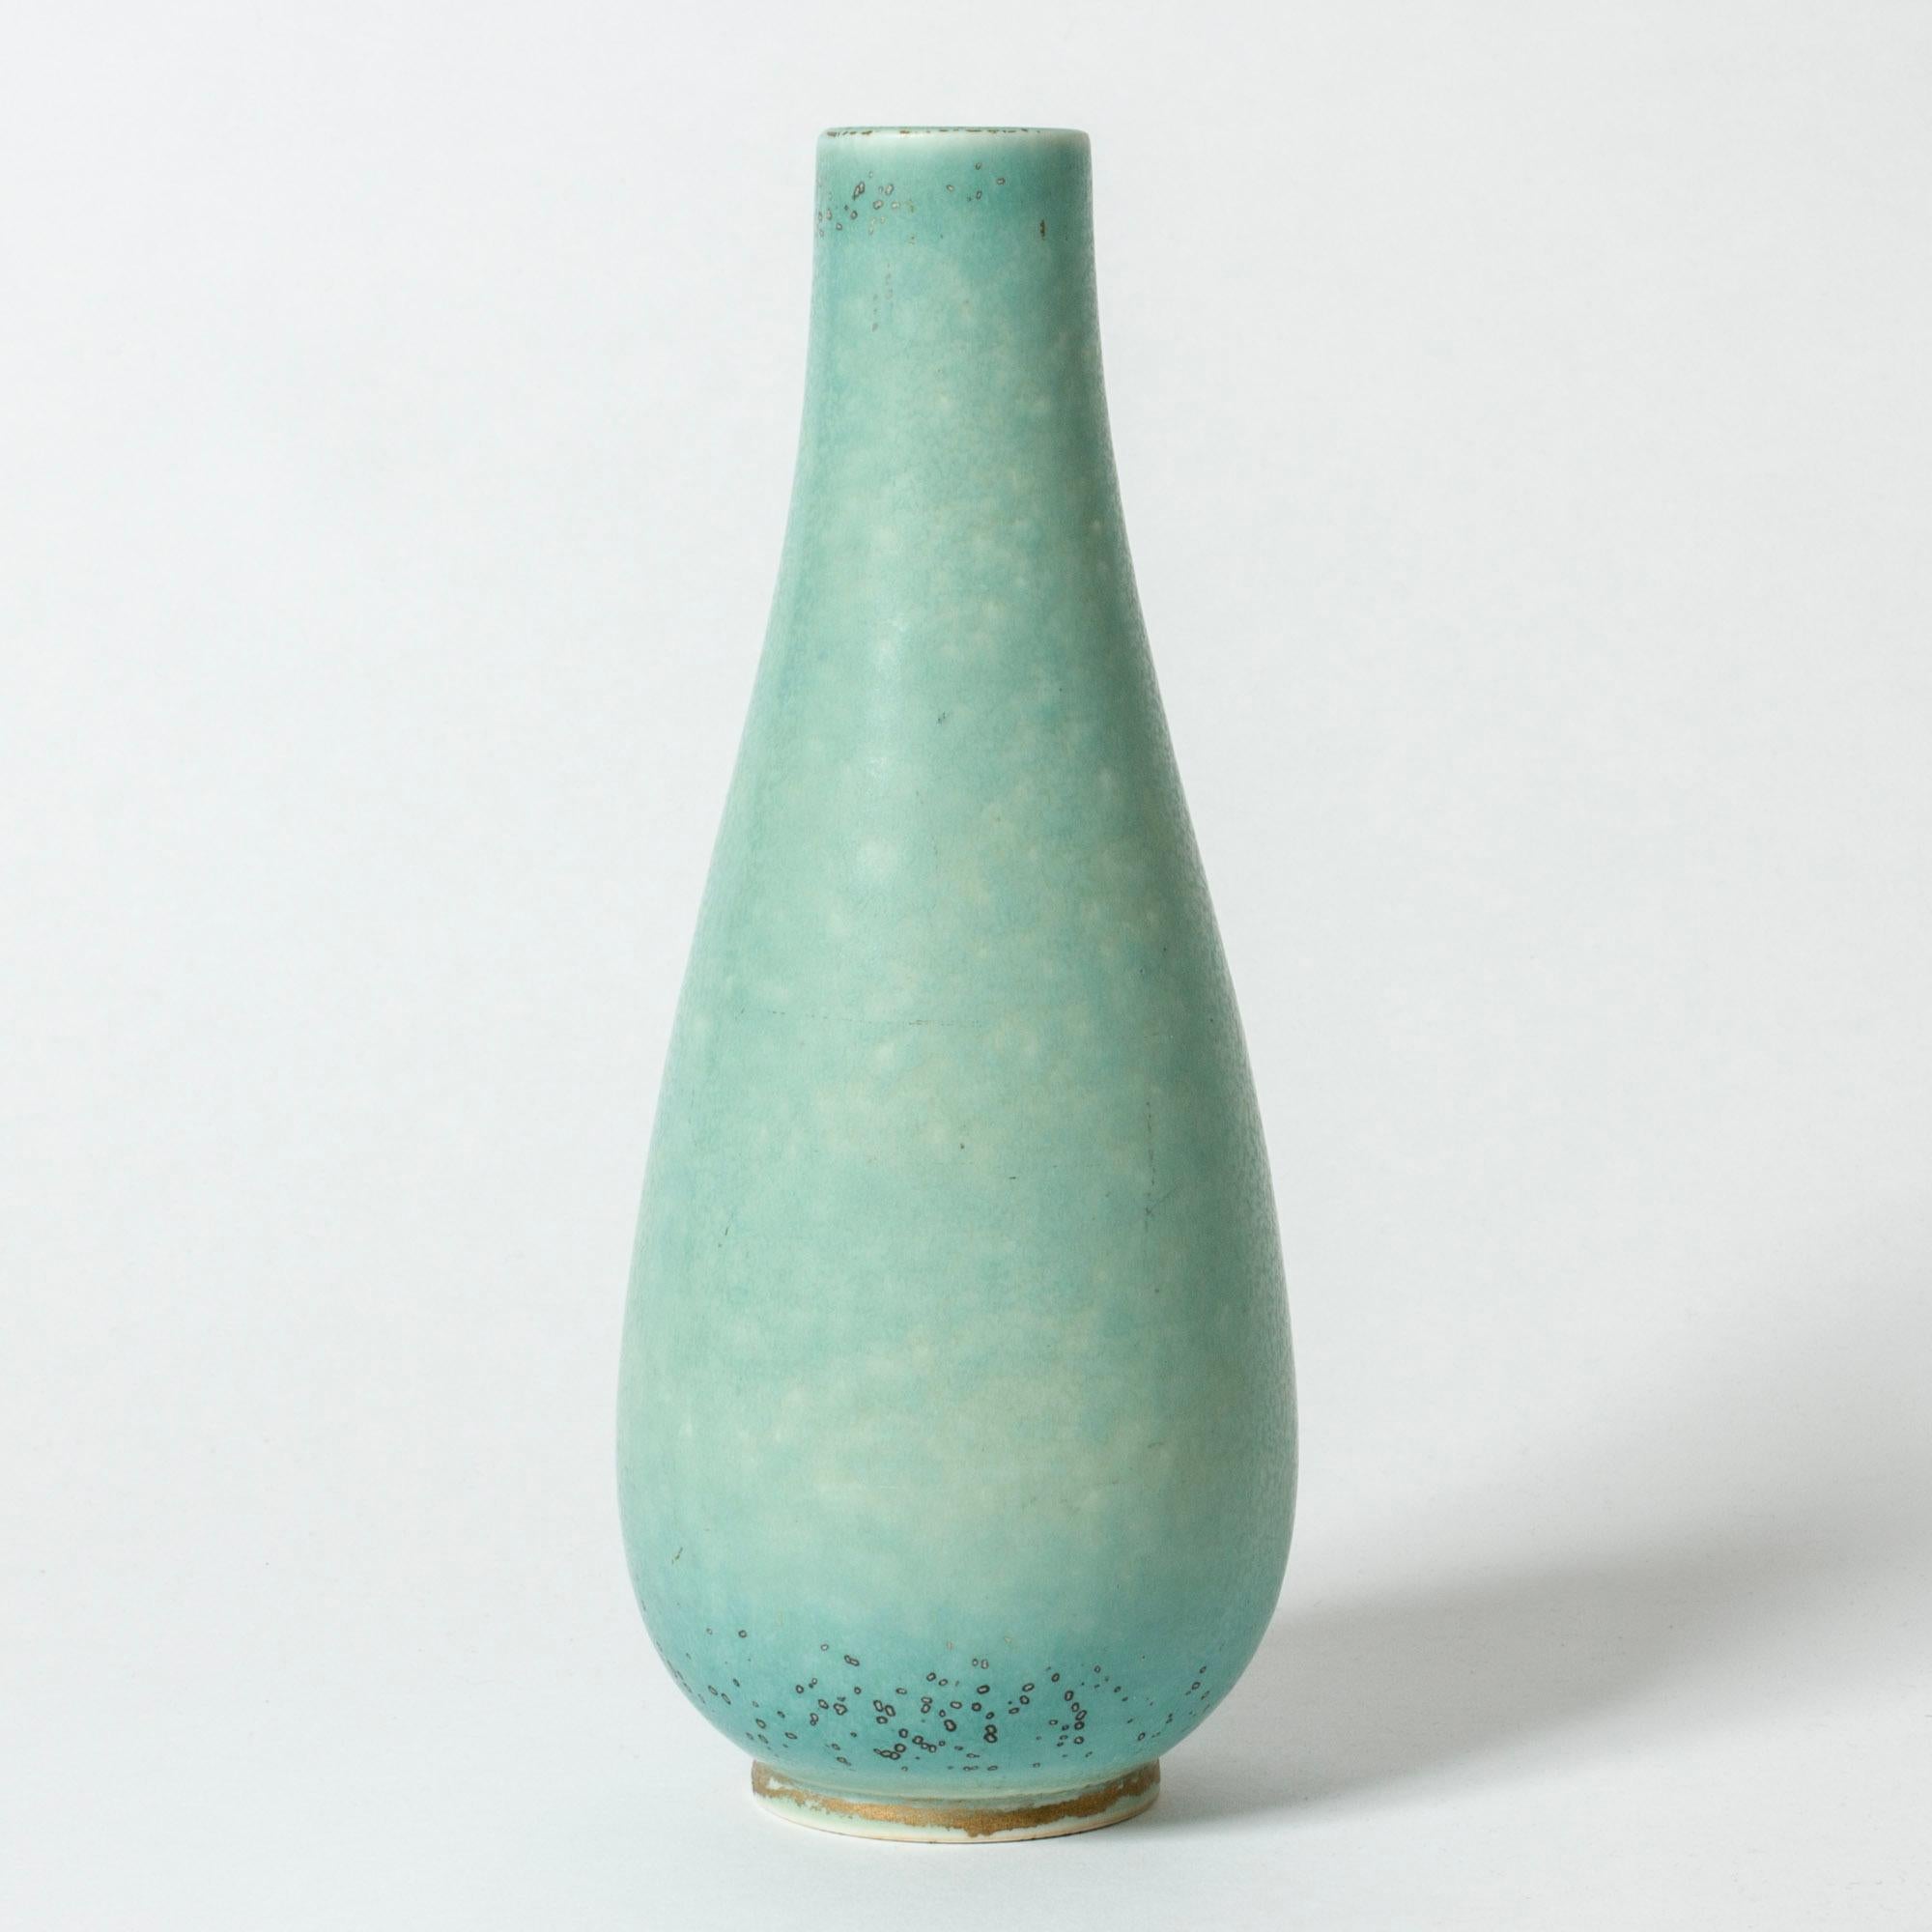 Lovely stoneware vase by Gunnar Nylund, in a sleek form. Pale celadon green glaze with “Mimosa” flecks.

Gunnar Nylund was one of the most influential ceramicists and designers of the Swedish mid-century period. He was Rörstrand’s creative leader